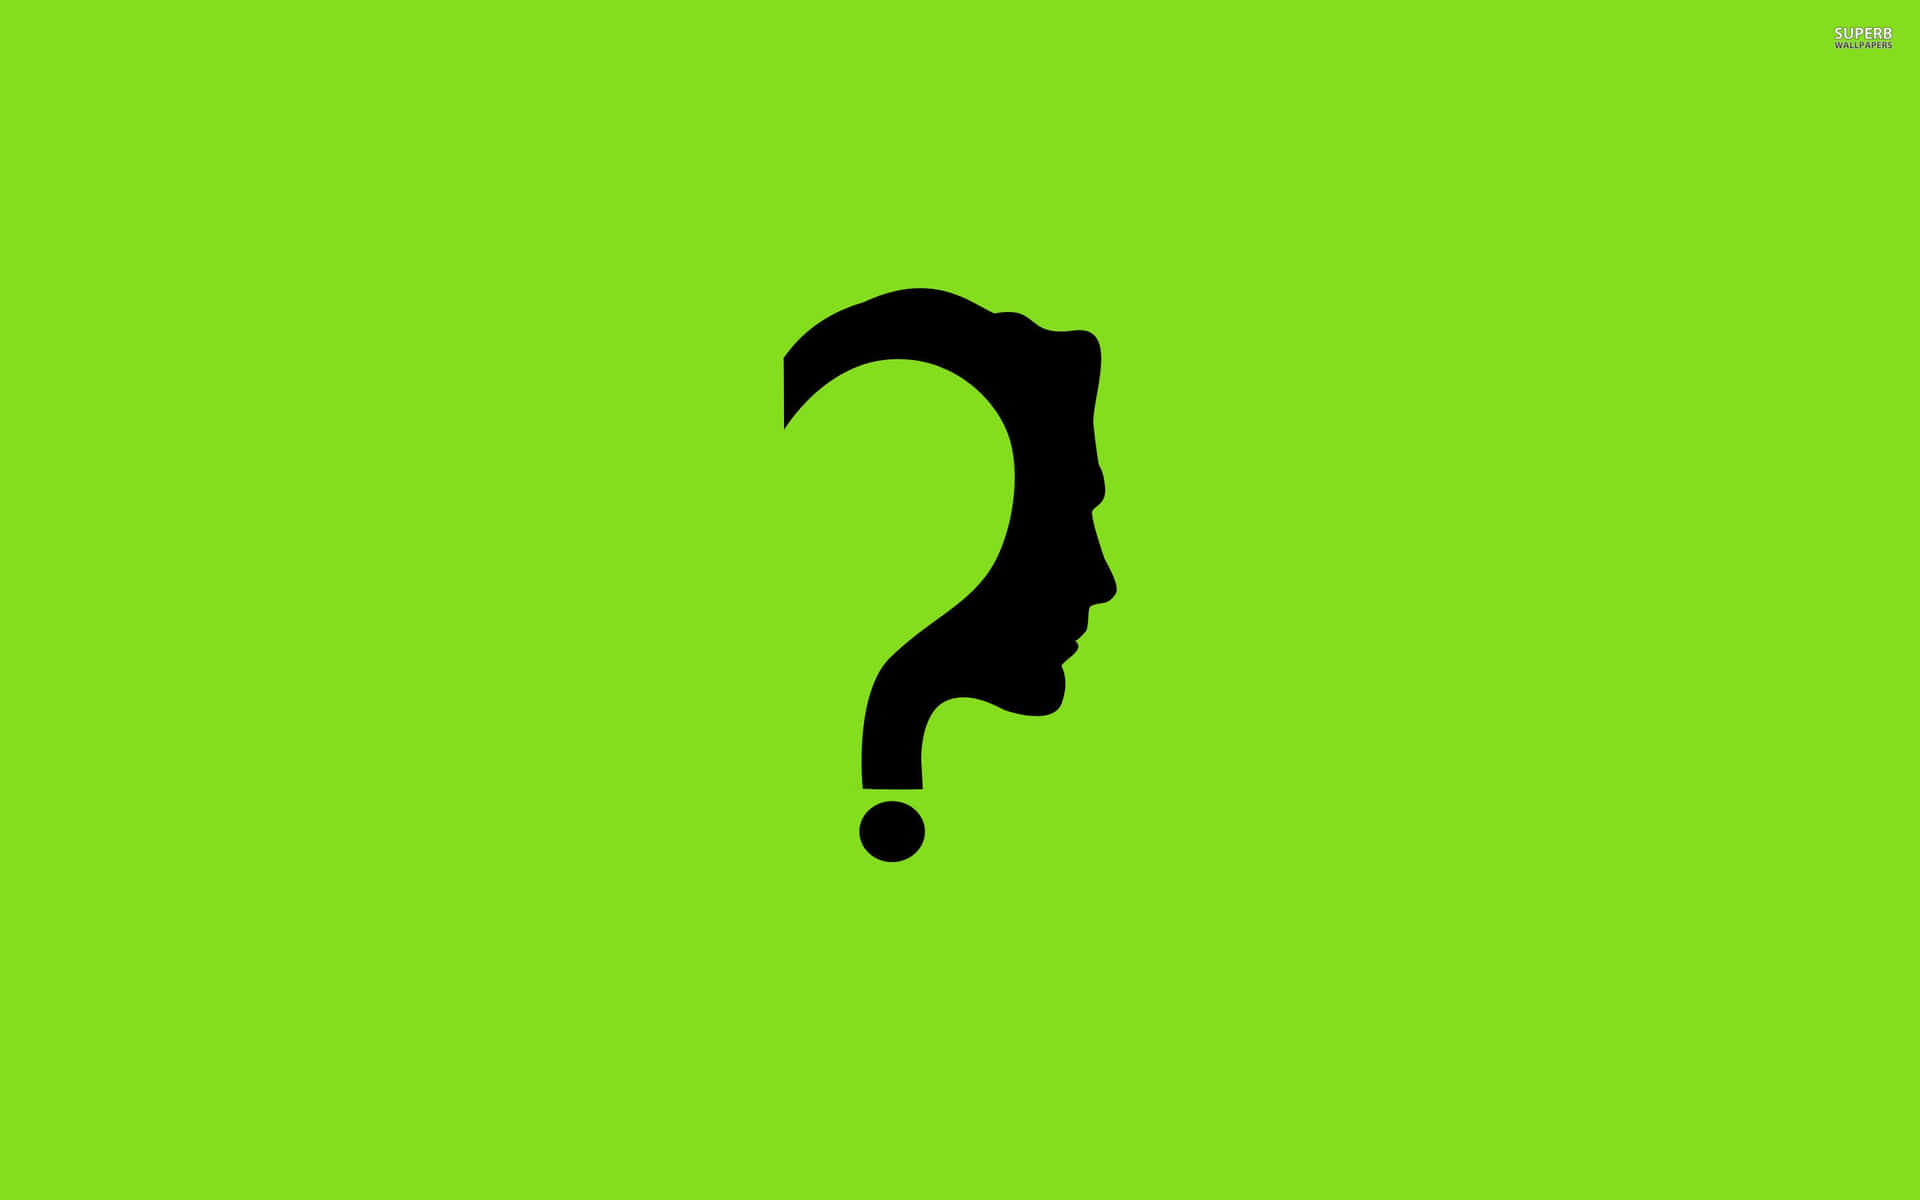 A Black Silhouette Of A Person With A Question Mark On A Green Background